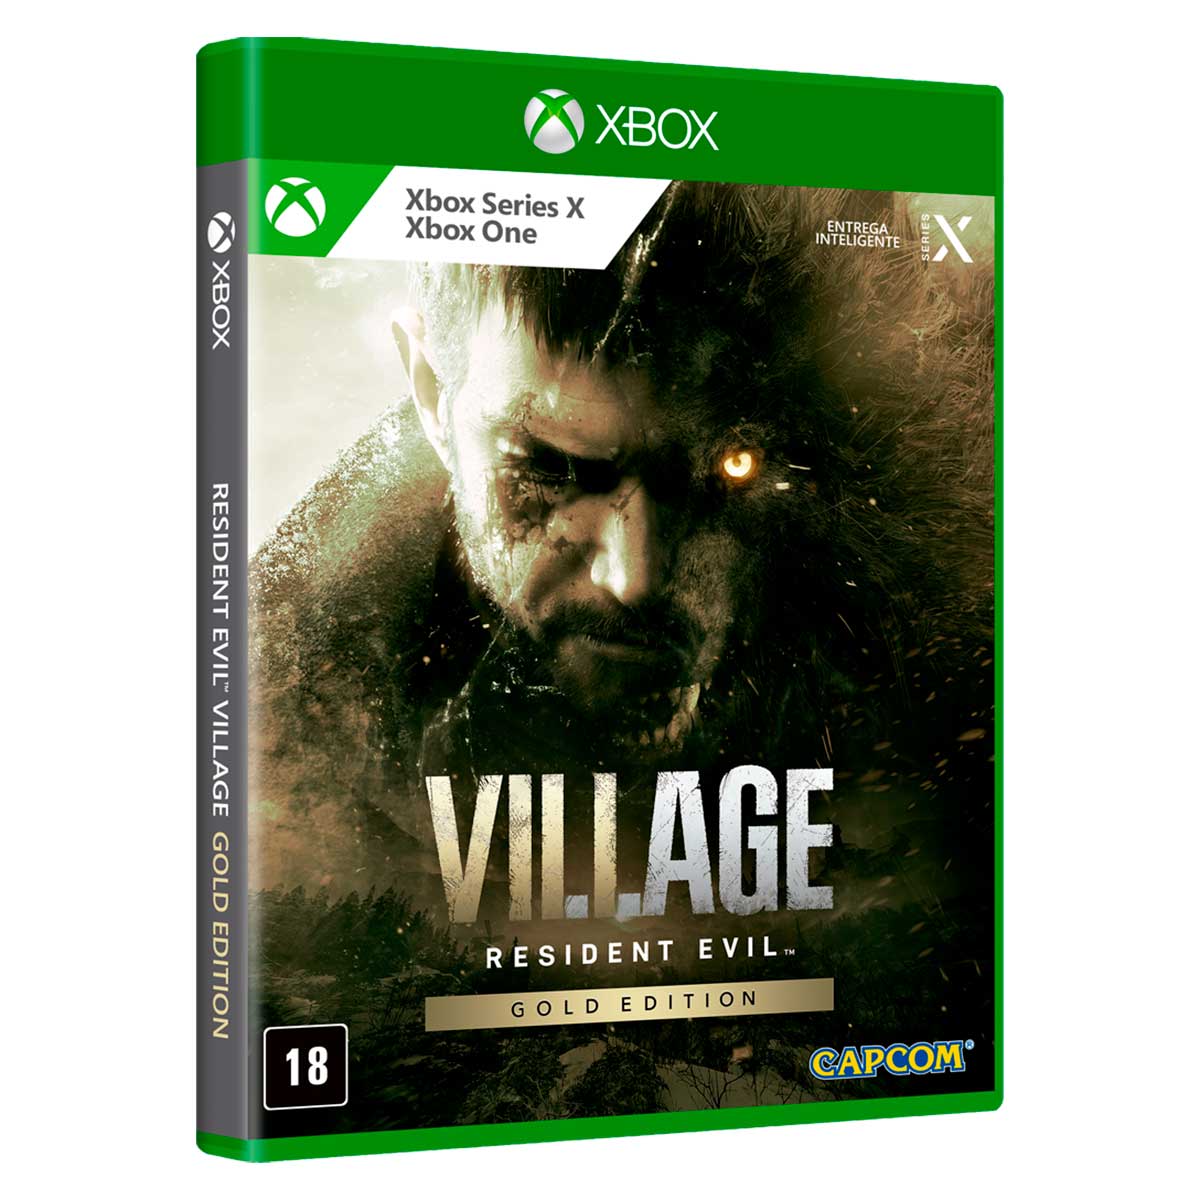 Resident Evil Village Gold Edition - Xbox One E Series X